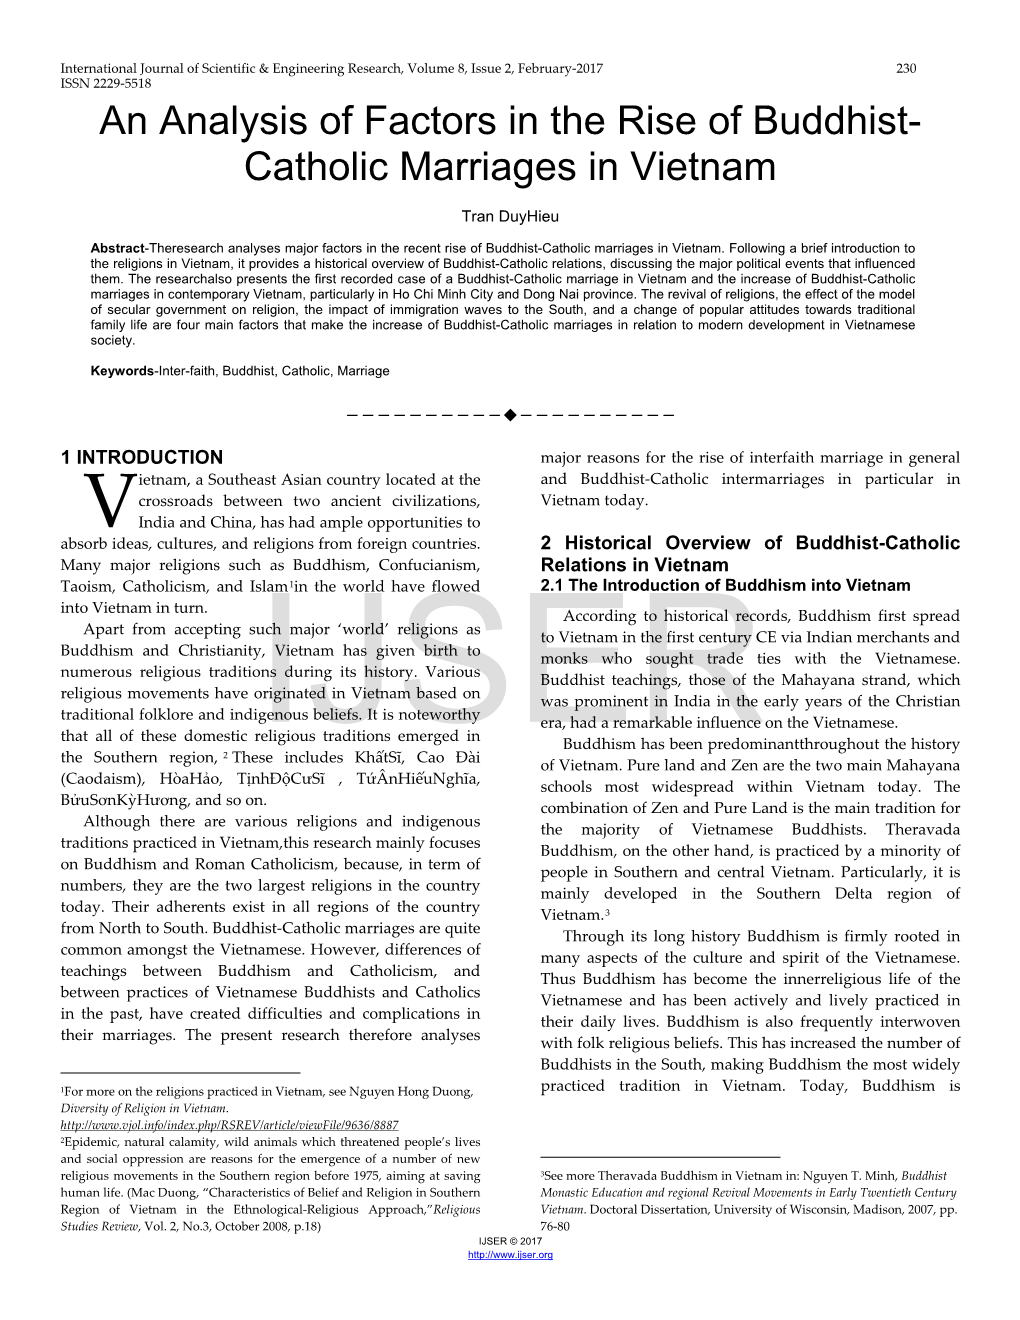 An Analysis of Factors in the Rise of Buddhist-Catholic Marriages In